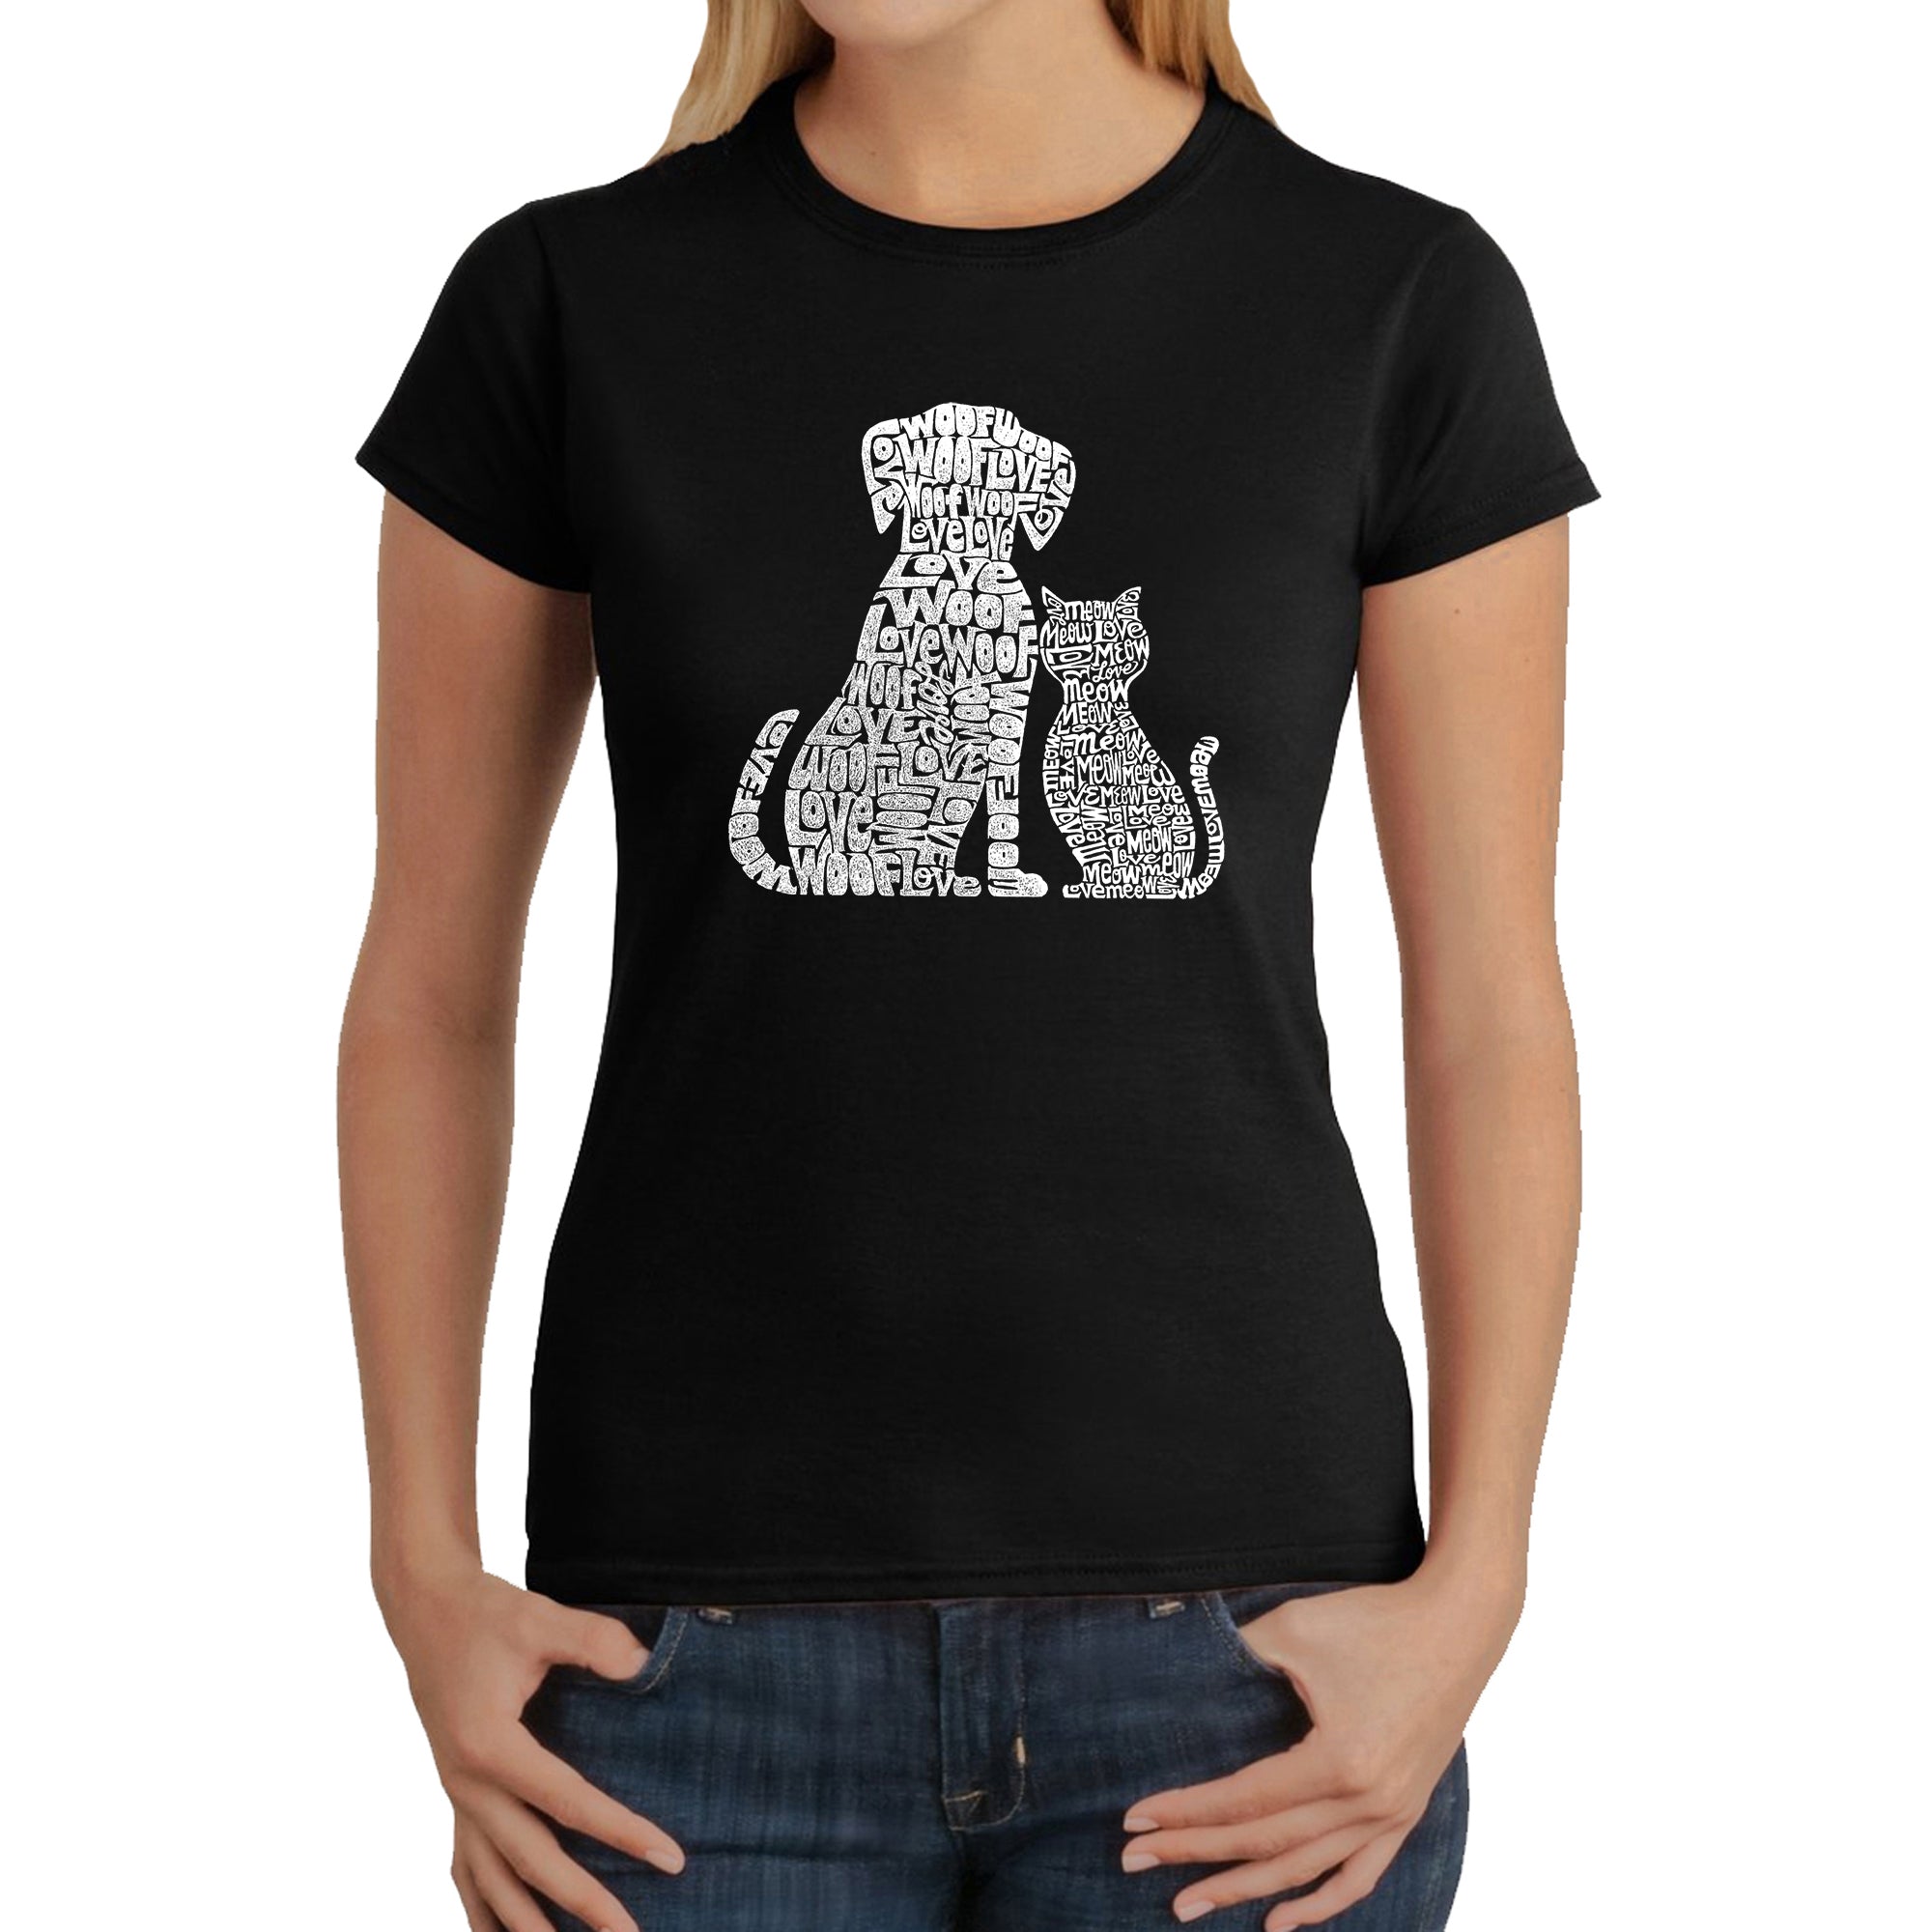 Dogs And Cats - Women's Word Art T-Shirt - Navy - Small